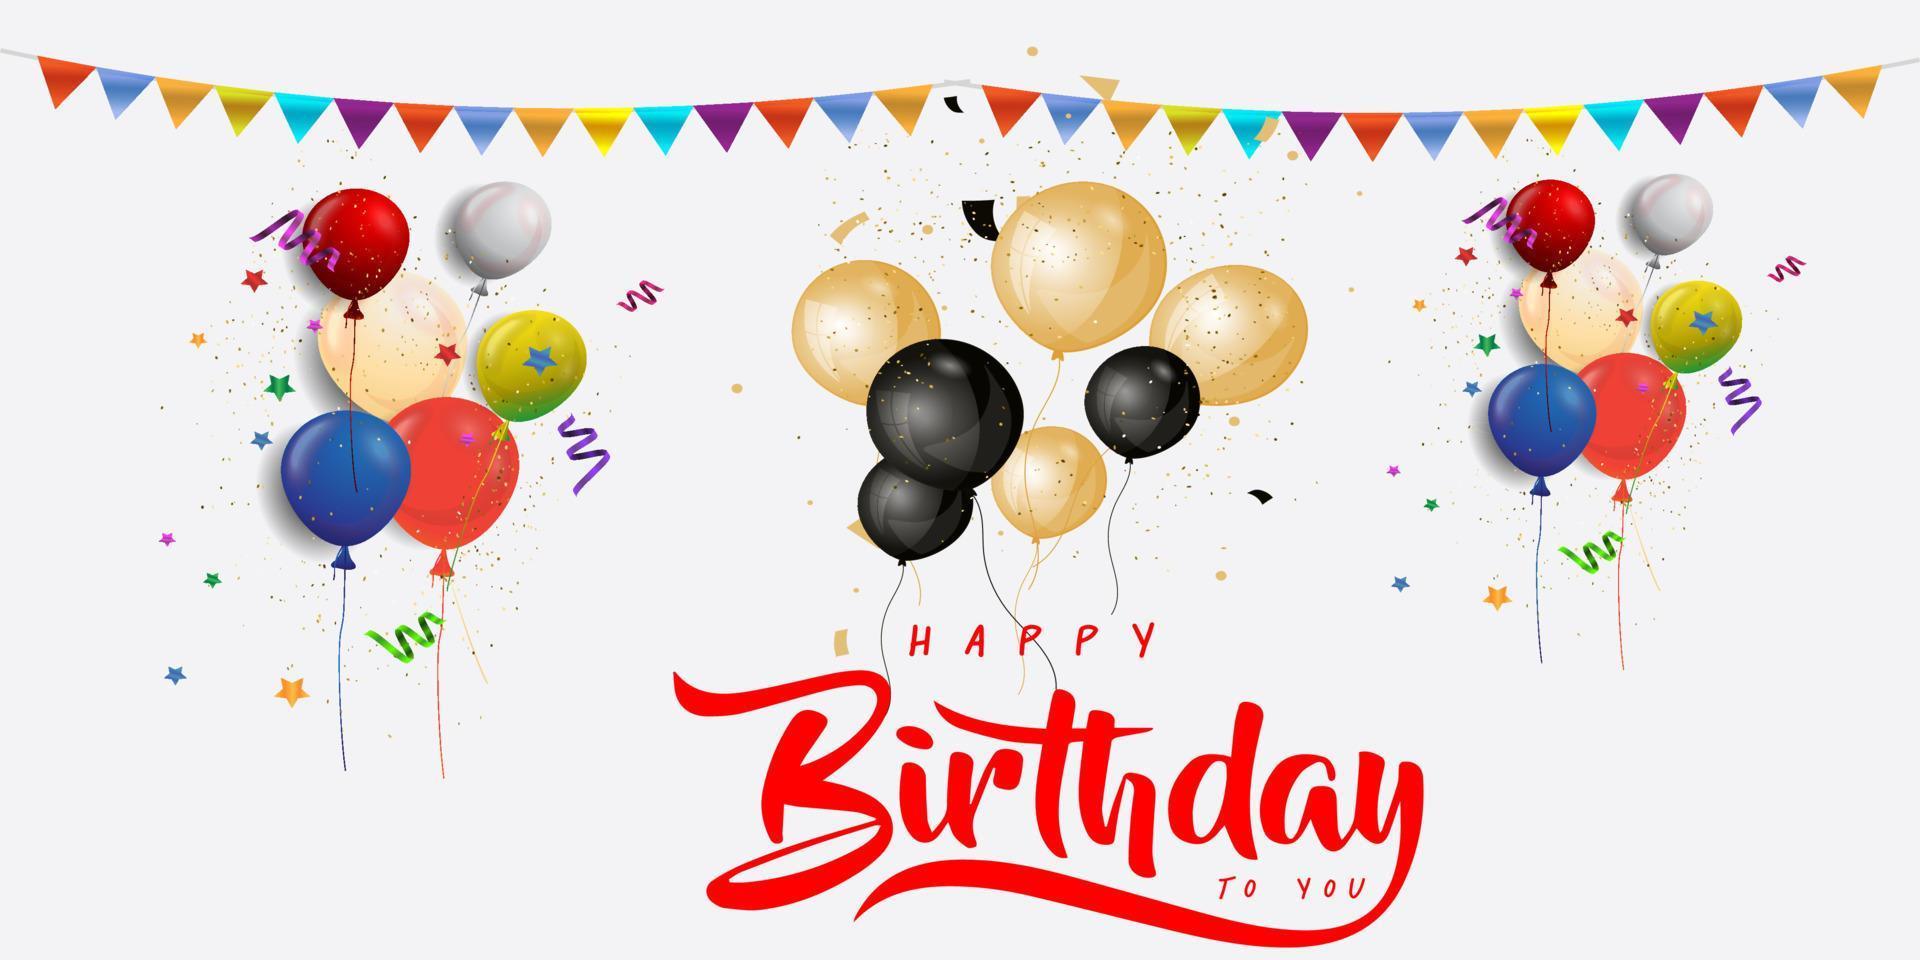 Birthday with Realistic Colorful Balloon Background Free Vector. Realistic 3d balloon background for party holiday birthday promotion card poster Free Vector. vector